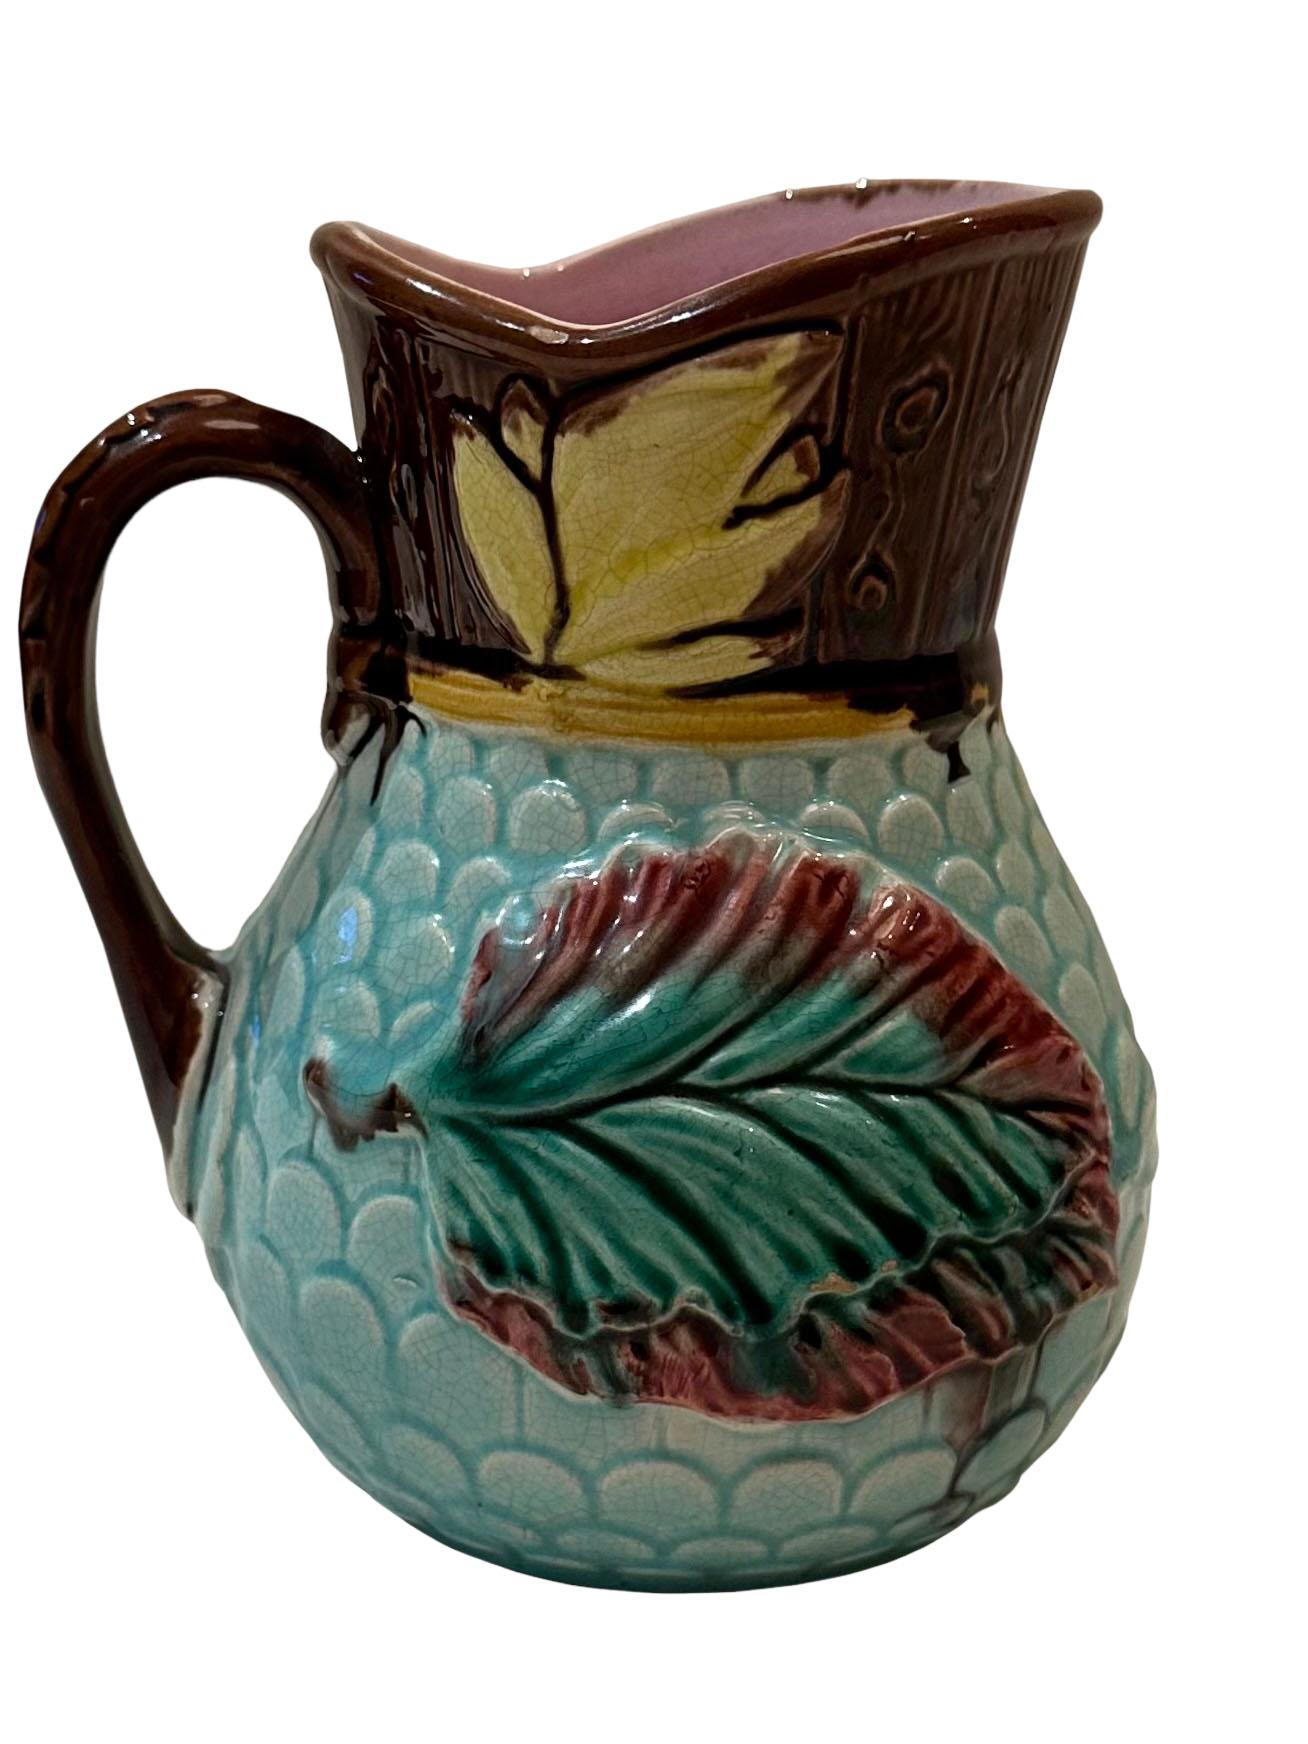 Late 19th Century English Majolica Pitcher For Sale